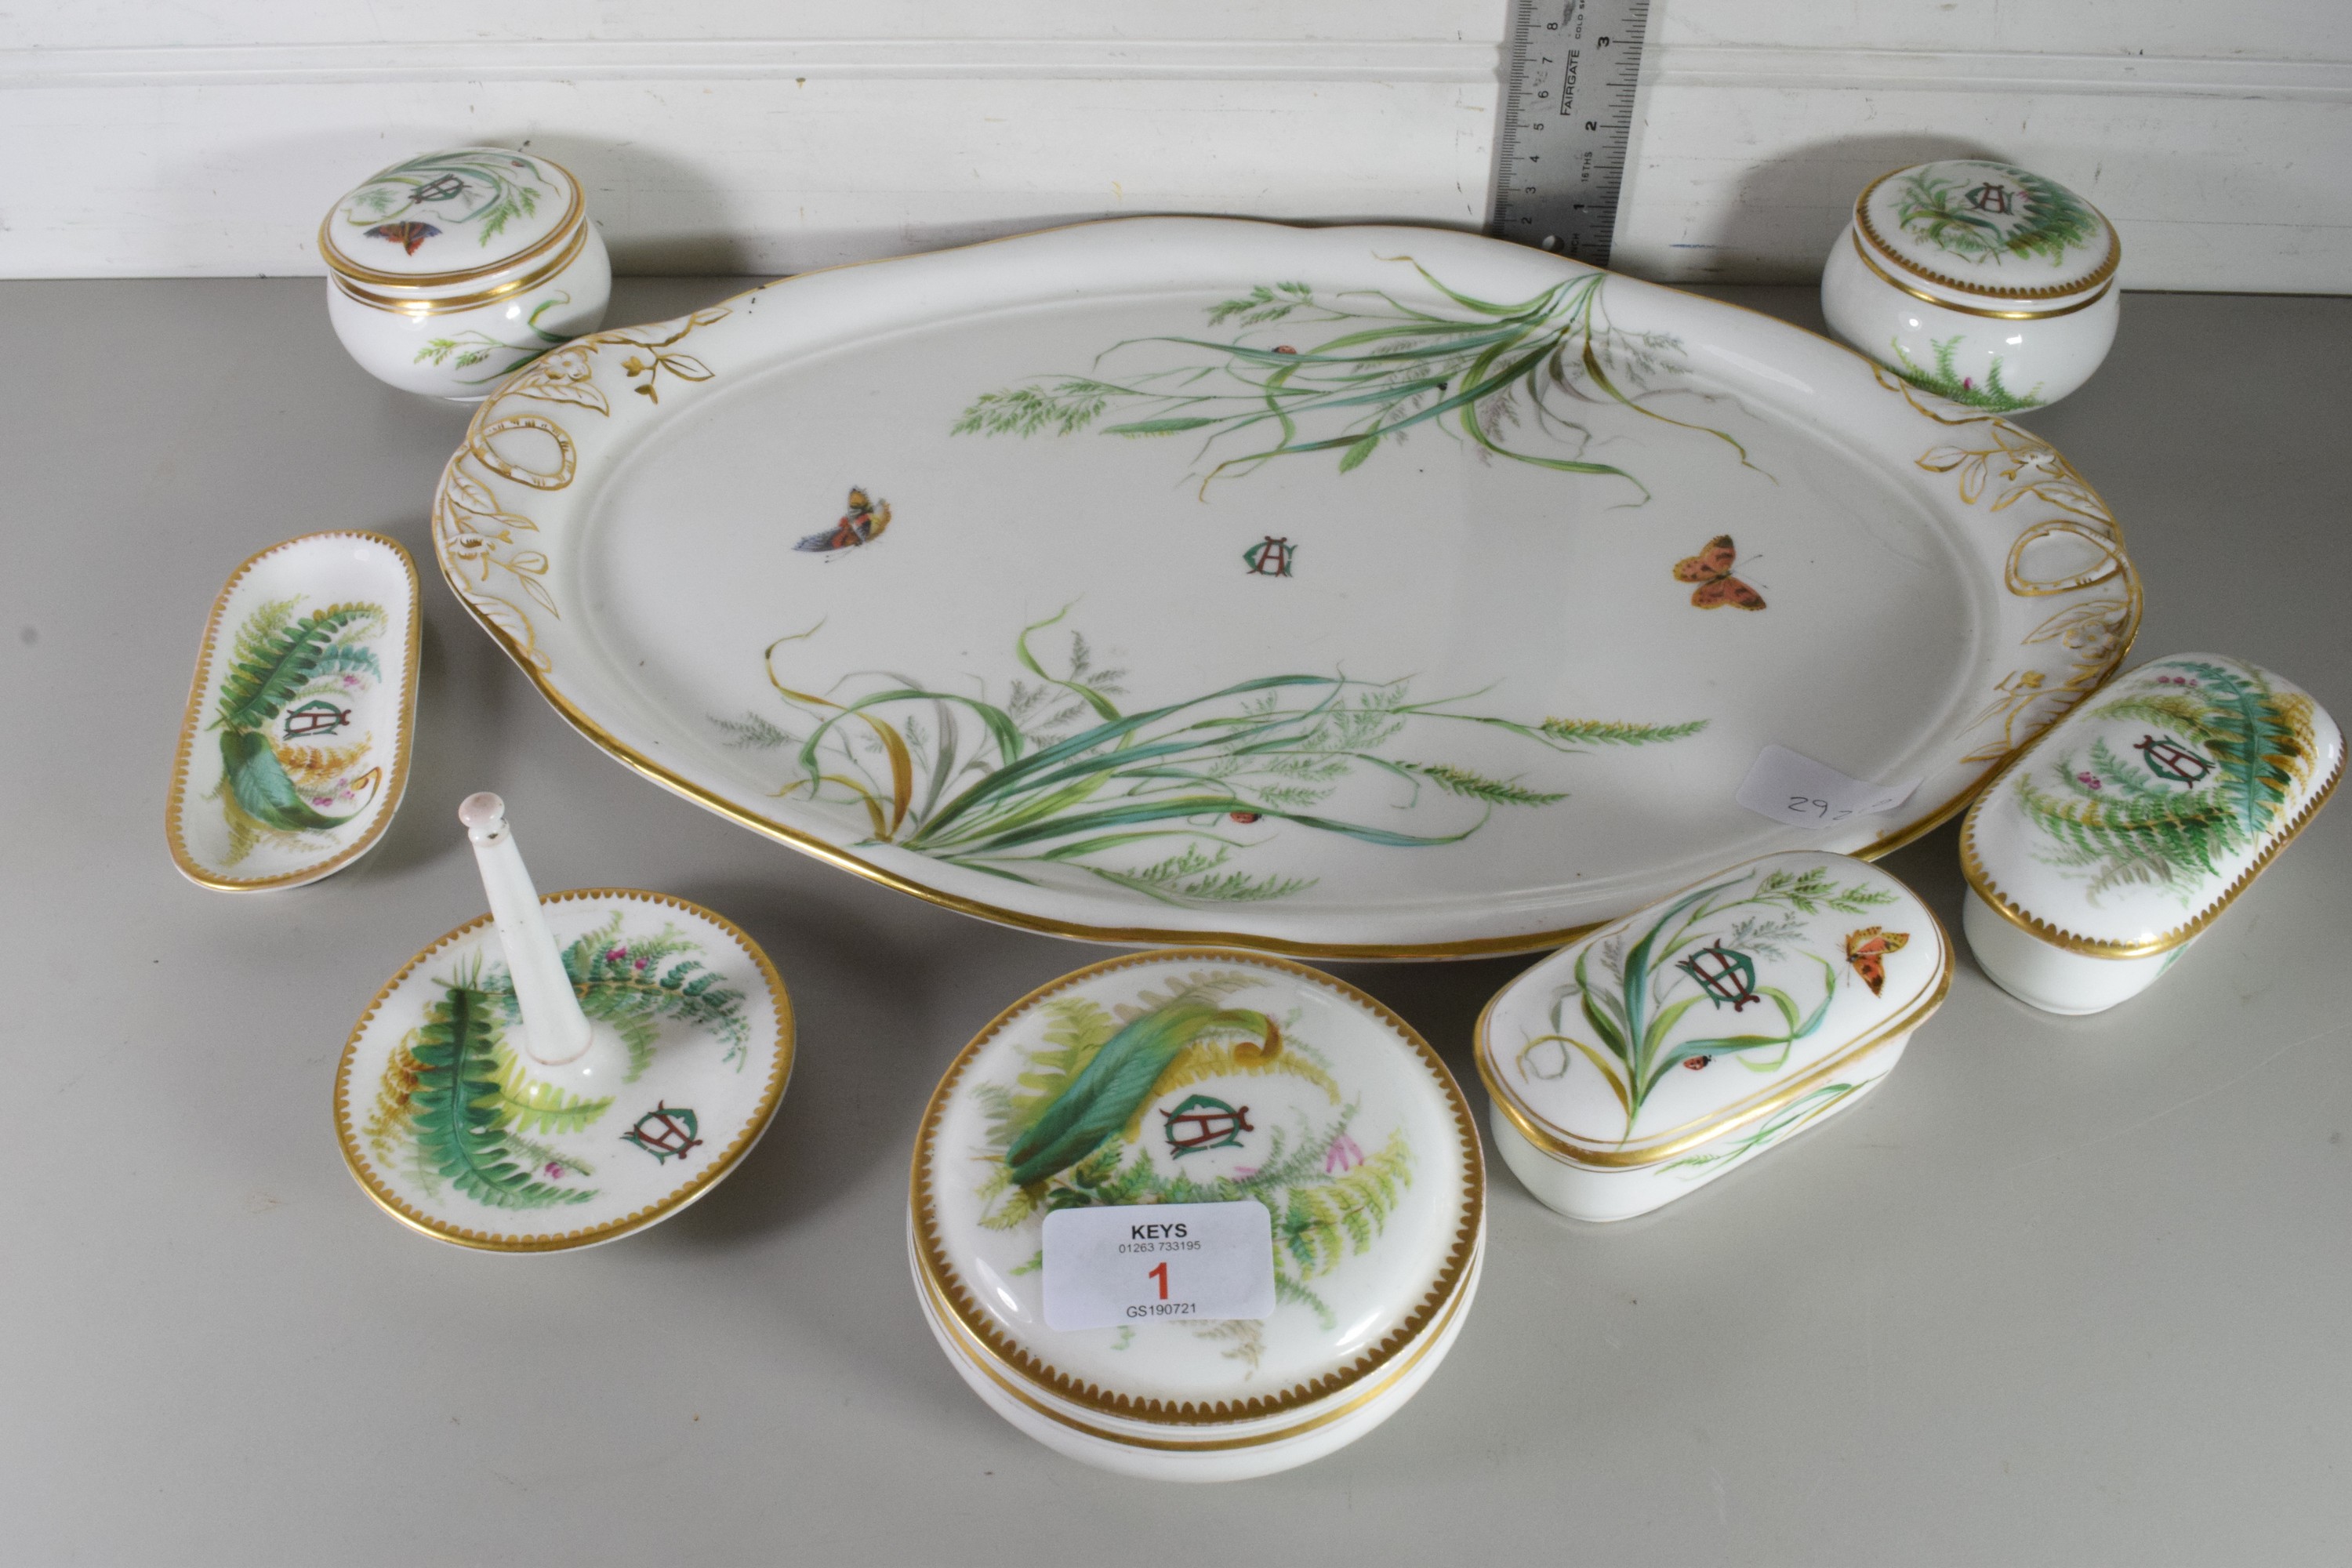 GILT RIMMED HAND PAINTED DRESSING TABLE SET DECORATED WITH BIRDS, BUTTERFLIES AND FLORA